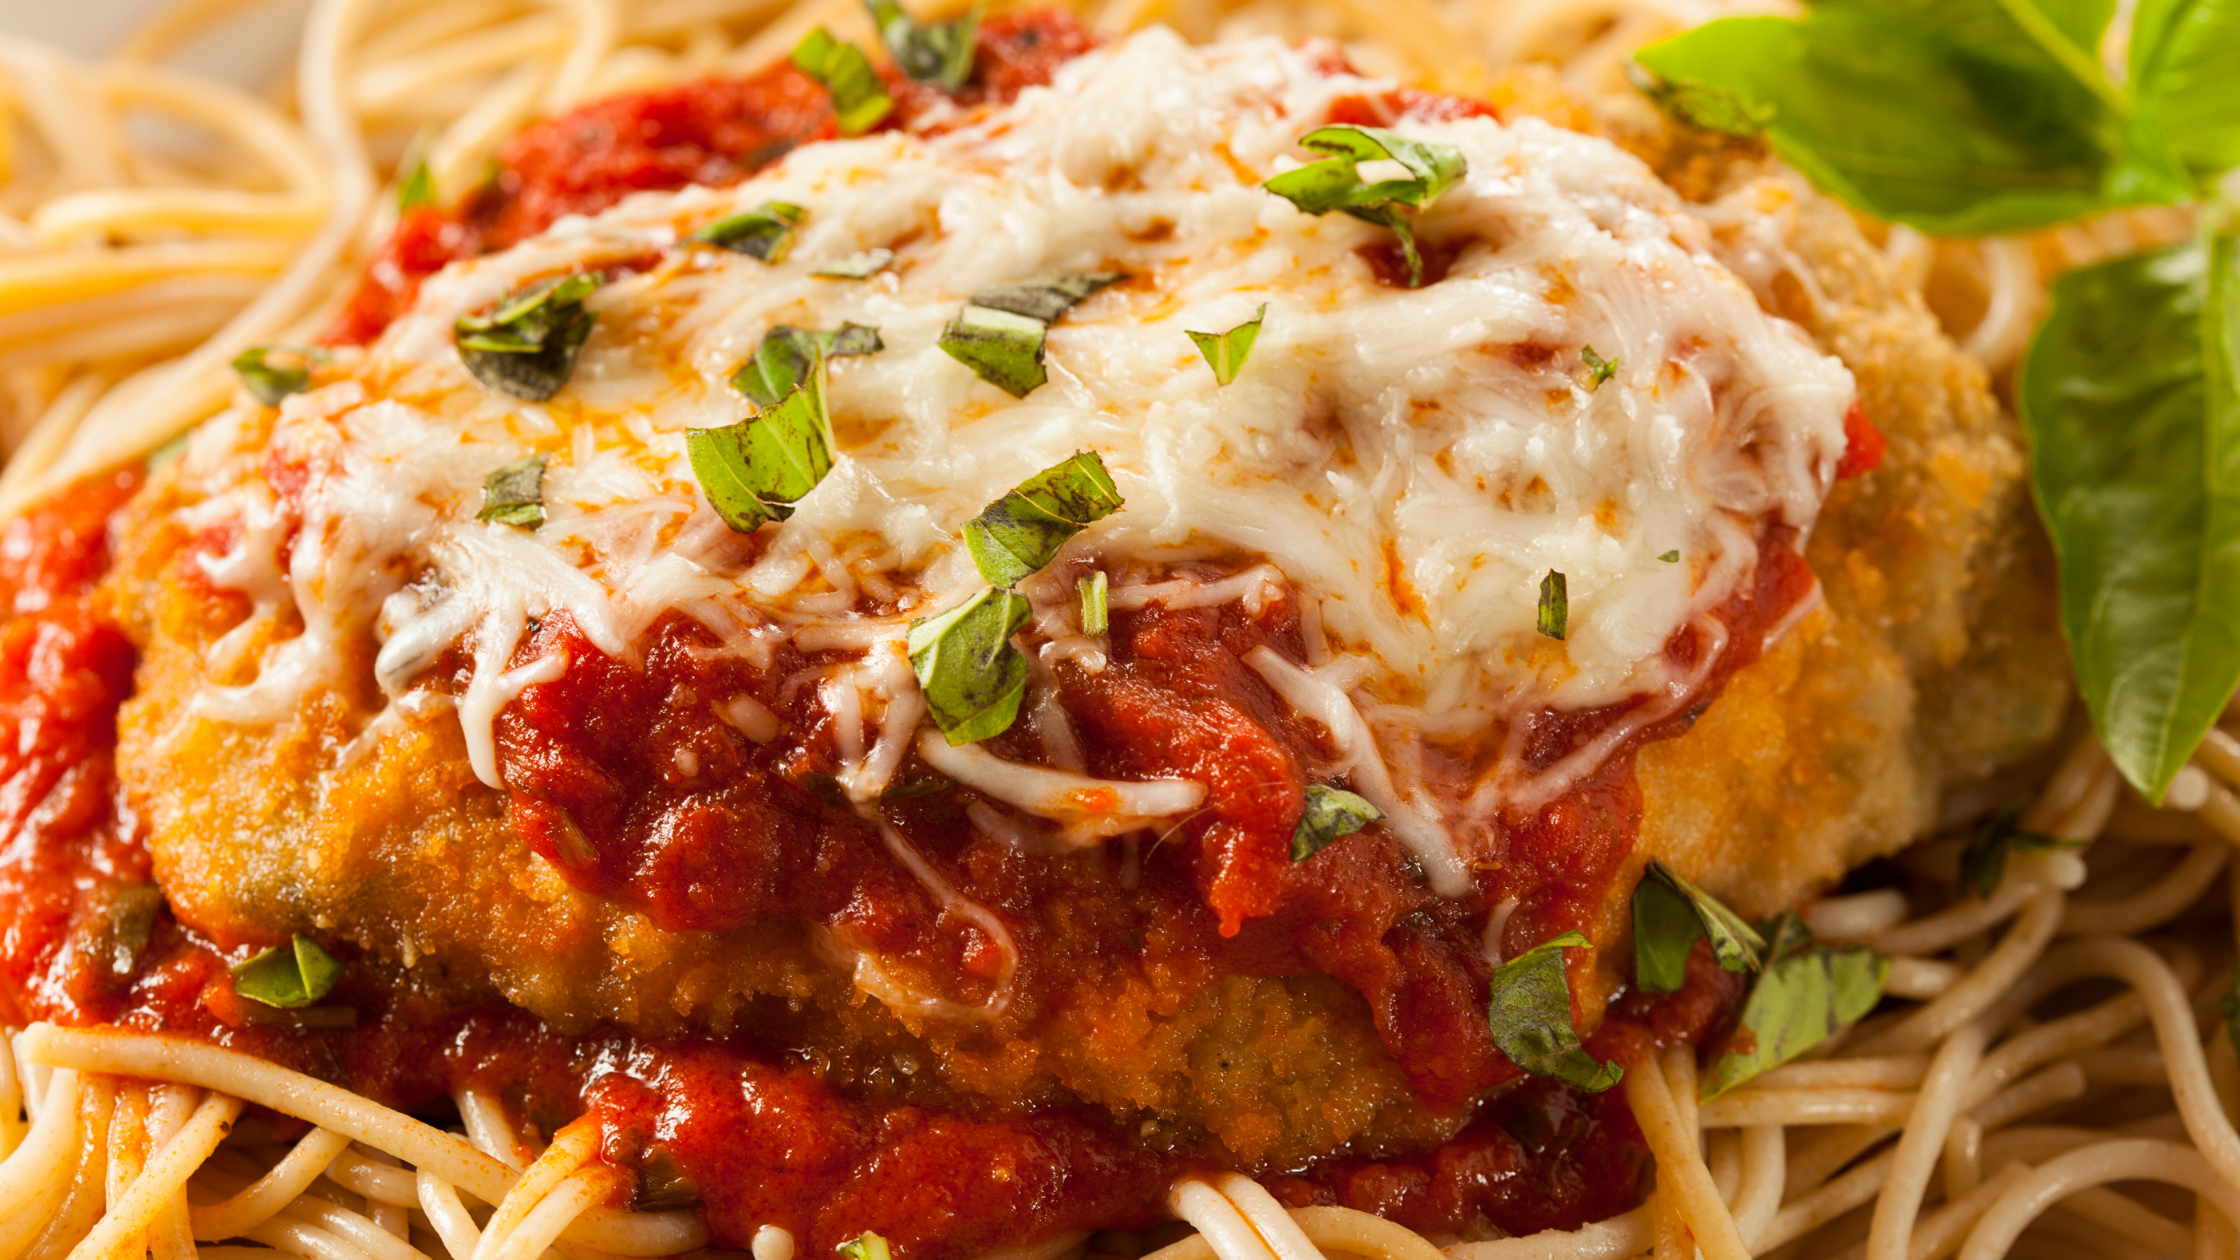 Low Calorie Chicken Parmesan with Whole Grain Spaghetti: A Healthy Recipe for Delicious Italian Food 26